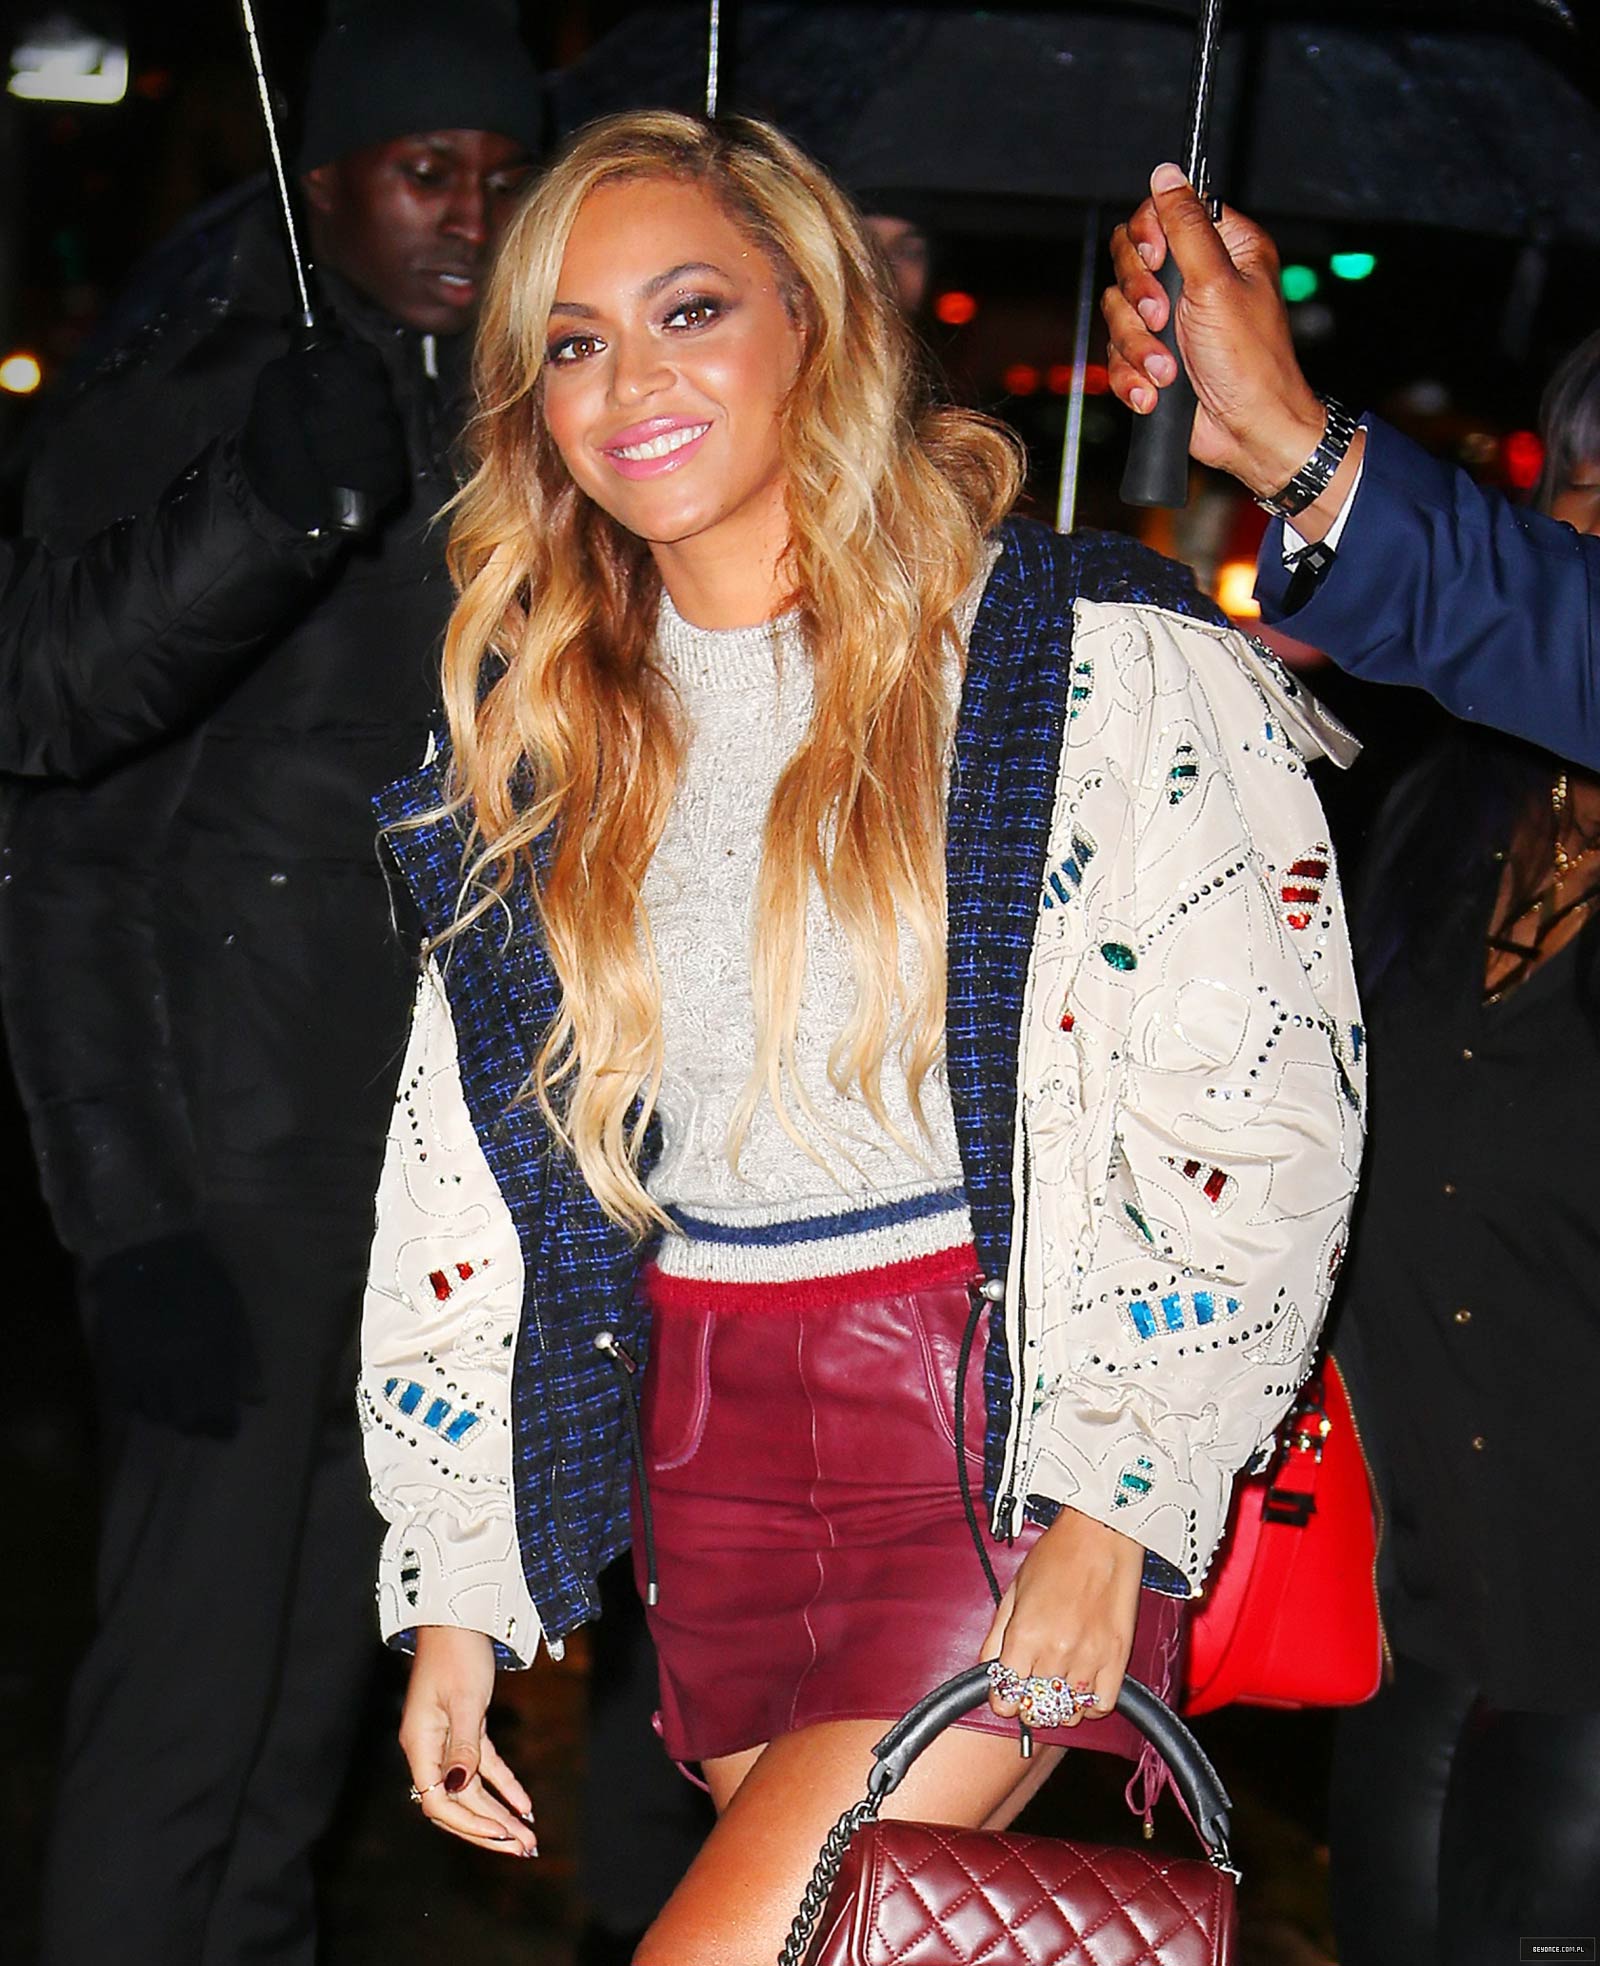 Beyonce at the Chanel Fashion Show in New York City